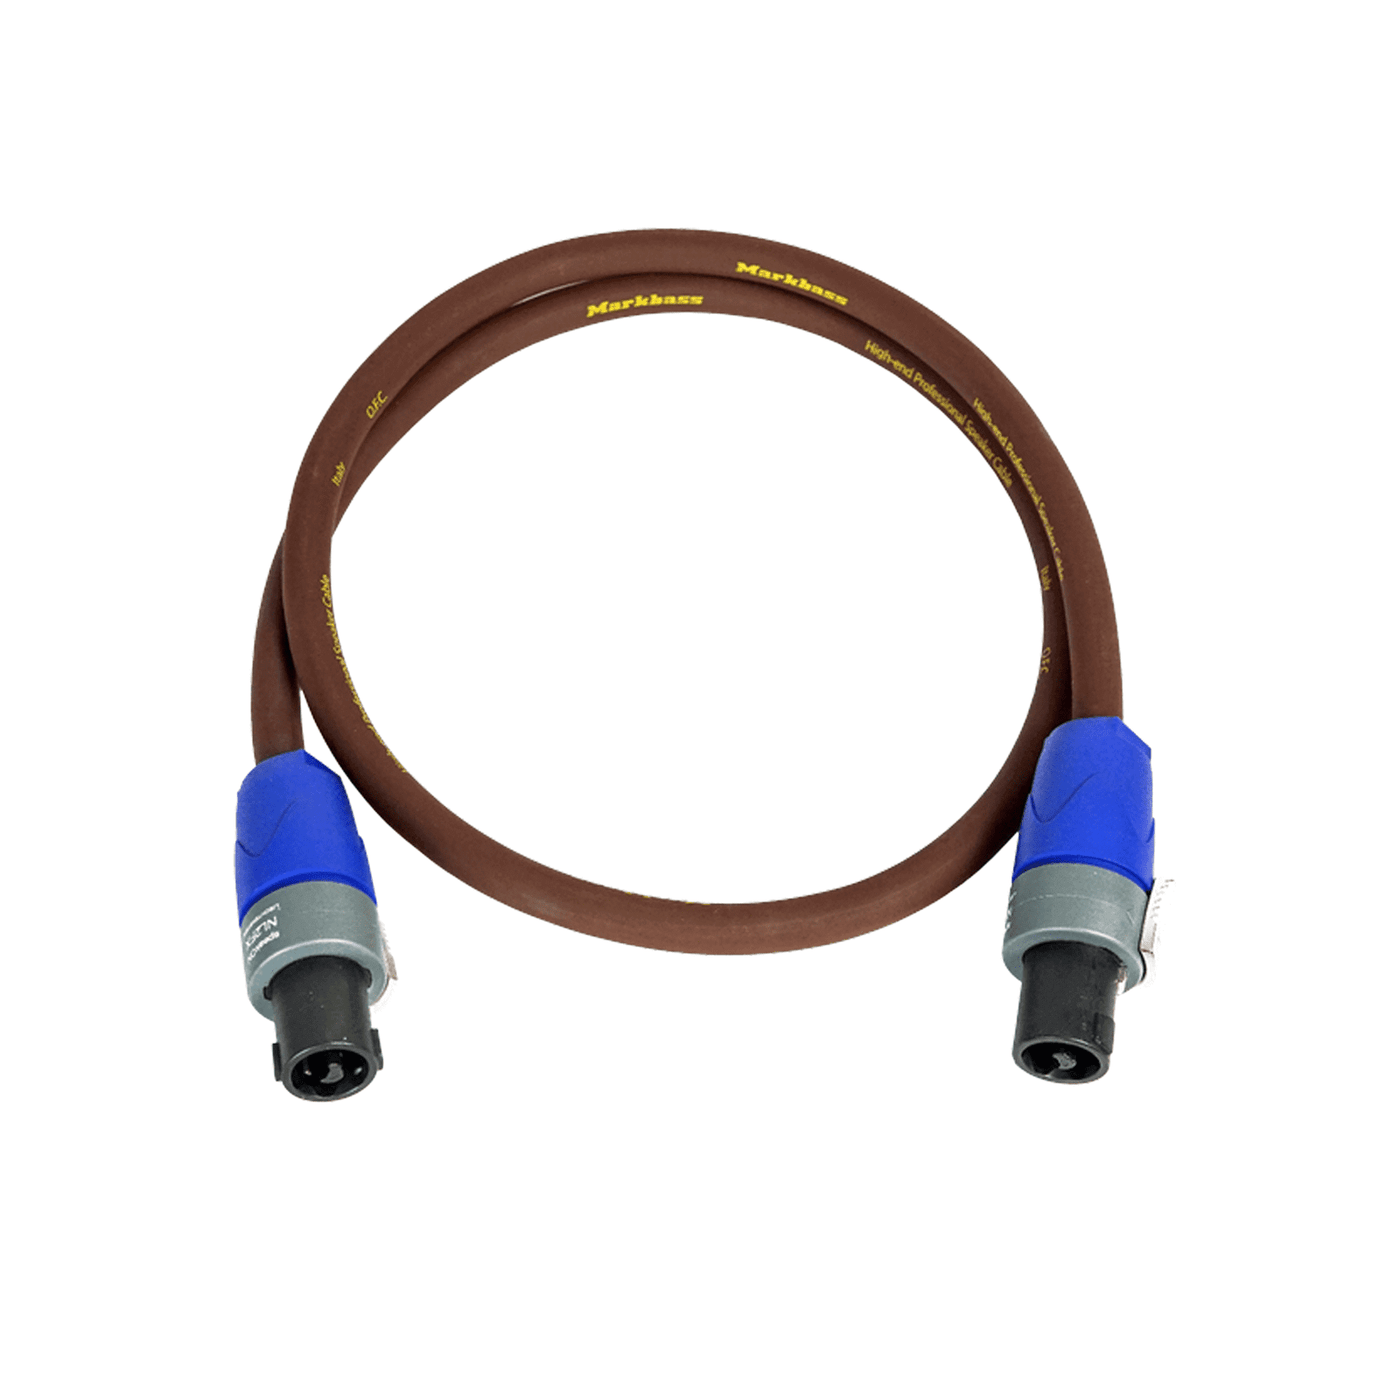 Markbass Super Power Cable (Speaker) - The MB SUPER POWER CABLES feature custom design 1/4" jumbo jack connectors hand-soldered in our laboratories at our factory in Italy, and hi-quality Neutrik © 2 Pole Speakon connectors.Our high-flexible custom speake